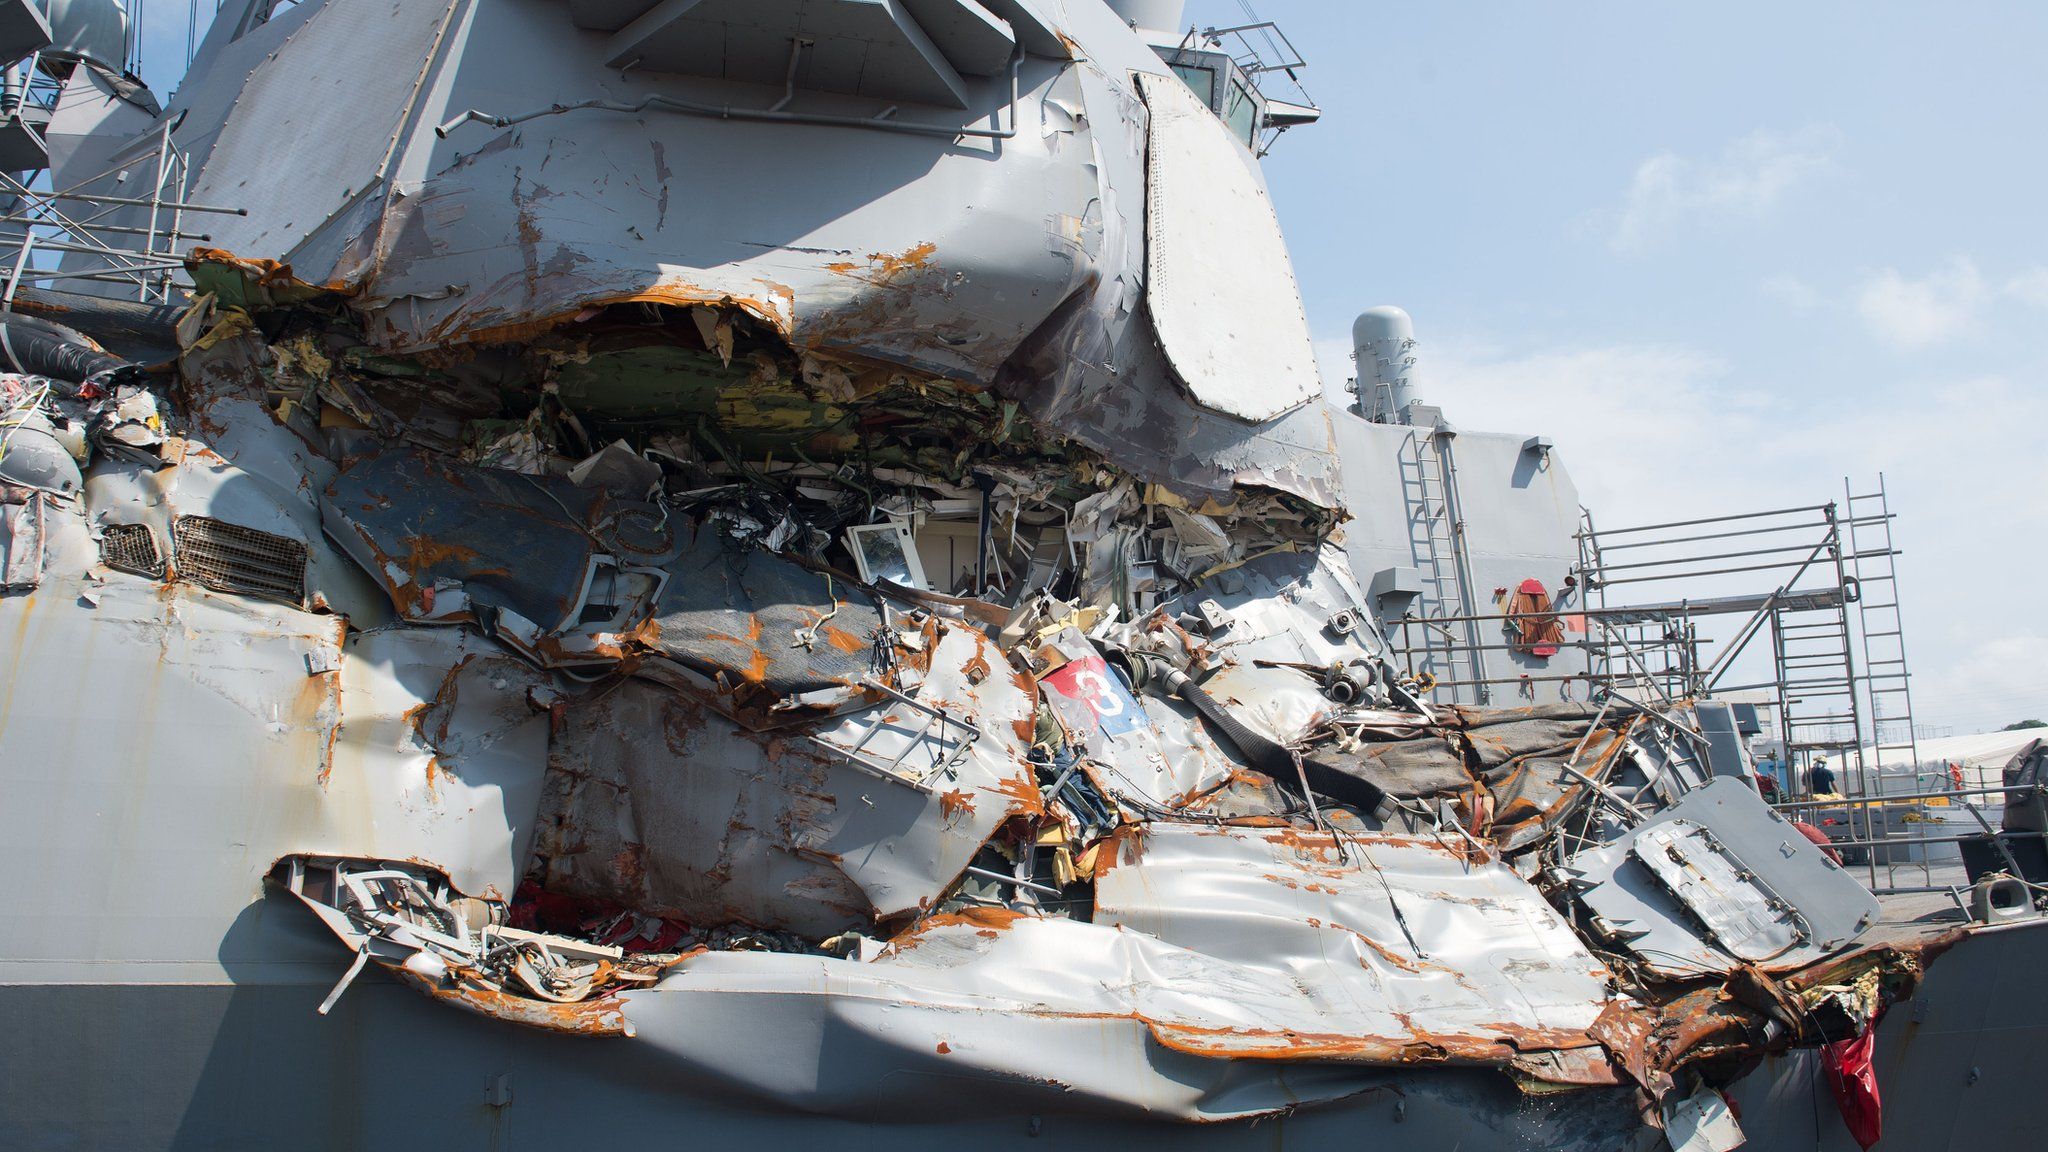 Guided-missile destroyer USS Fitzgerald undergoes repairs at Yokosuka after its June 17 collision with a merchant vessel